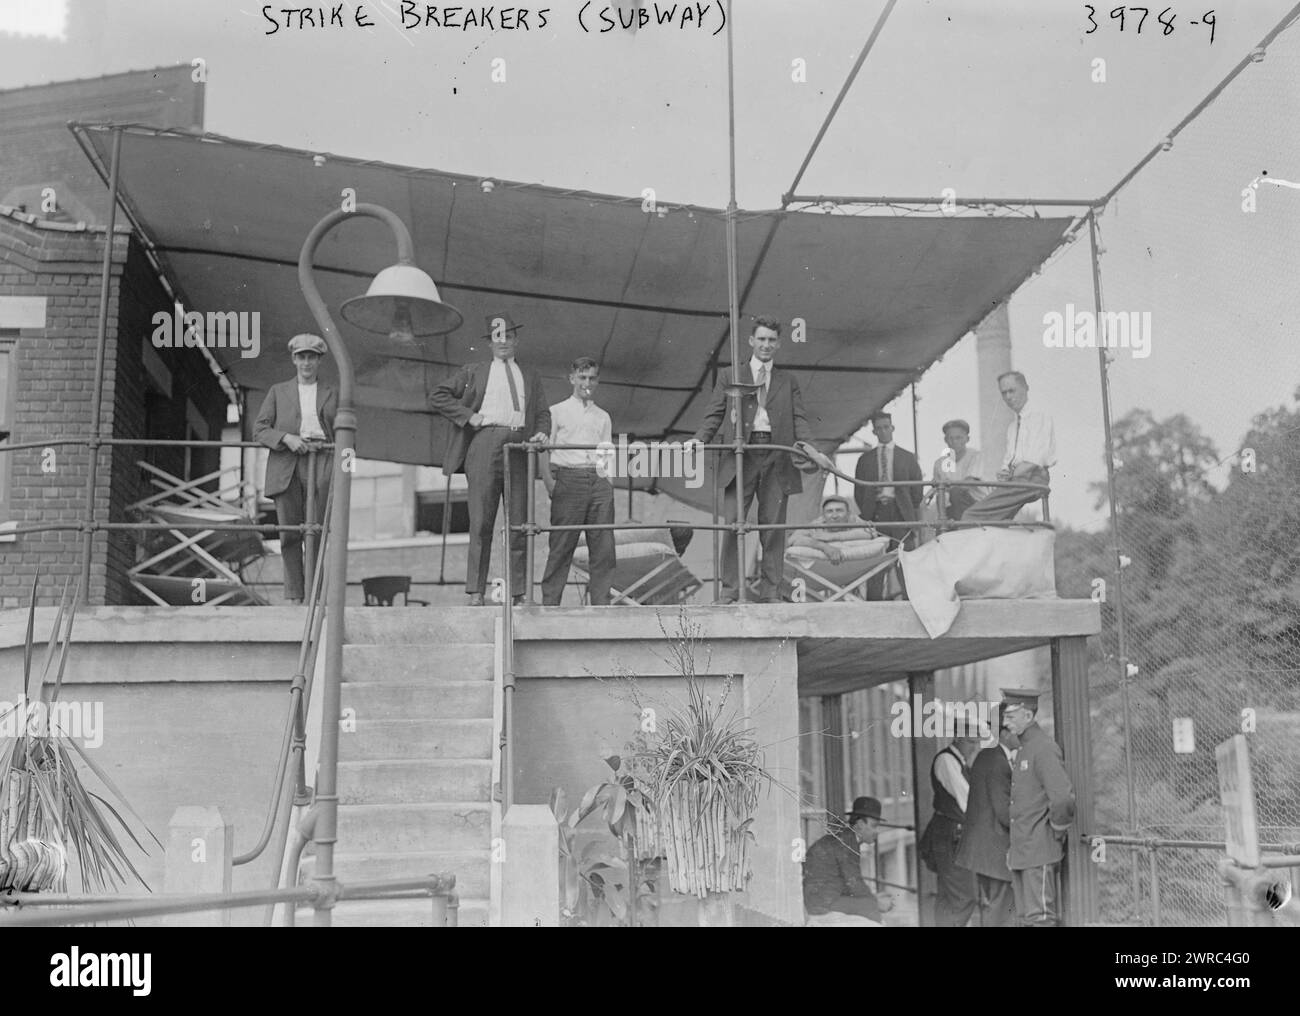 Strike breakers (subway), between ca. 1915 and ca. 1920, Glass negatives, 1 negative: glass Stock Photo